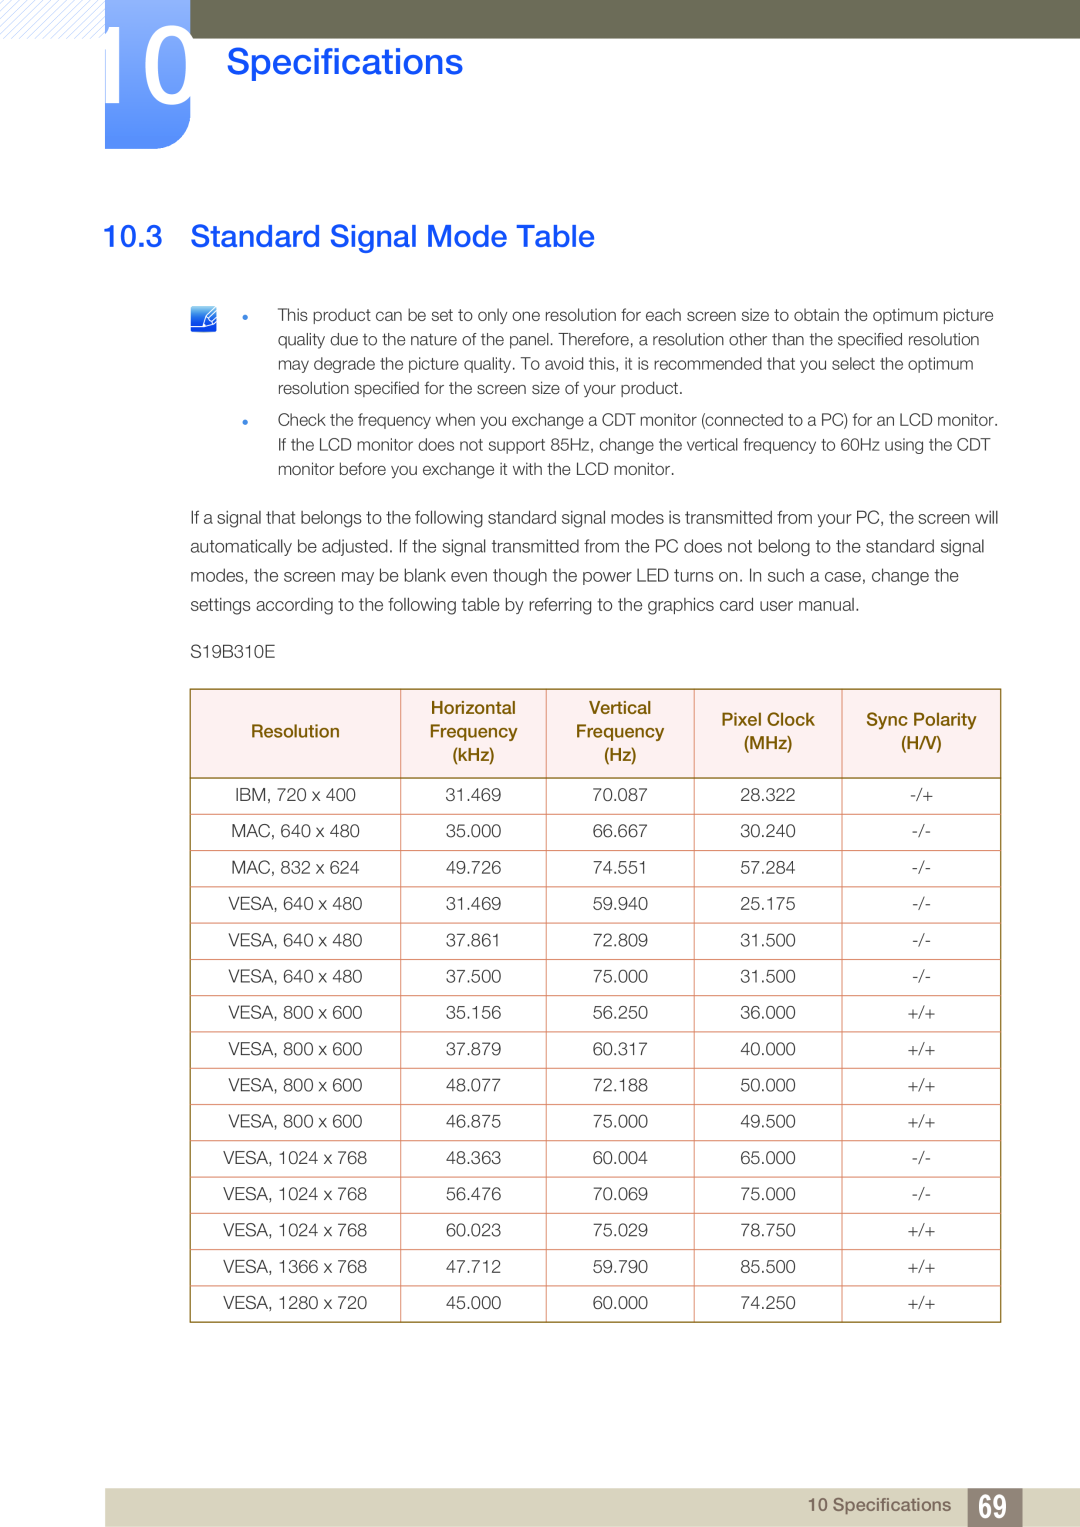 Samsung LS19B310ES/ZN manual Standard Signal Mode Table, Specifications, Horizontal, Vertical, Pixel Clock, Sync Polarity 